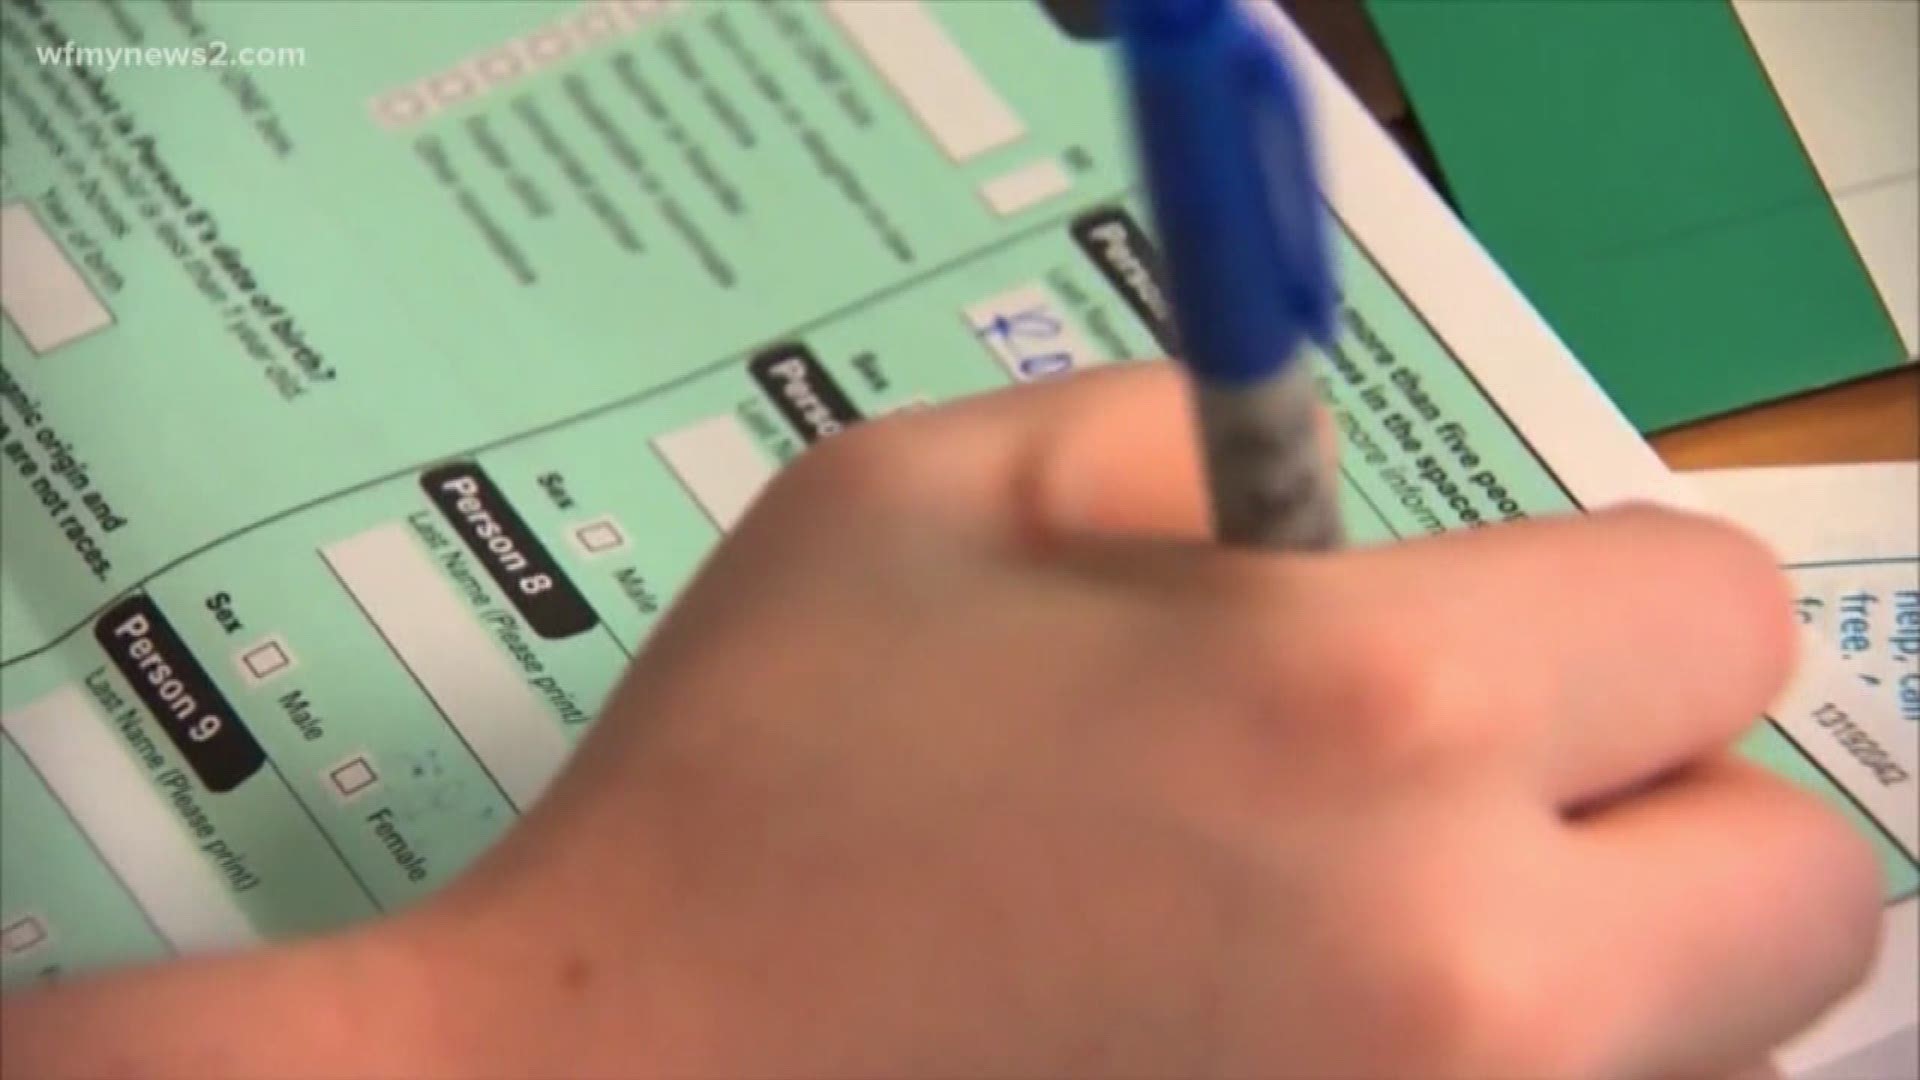 Filling out the census is crucial for communities to receive state and federal funding.